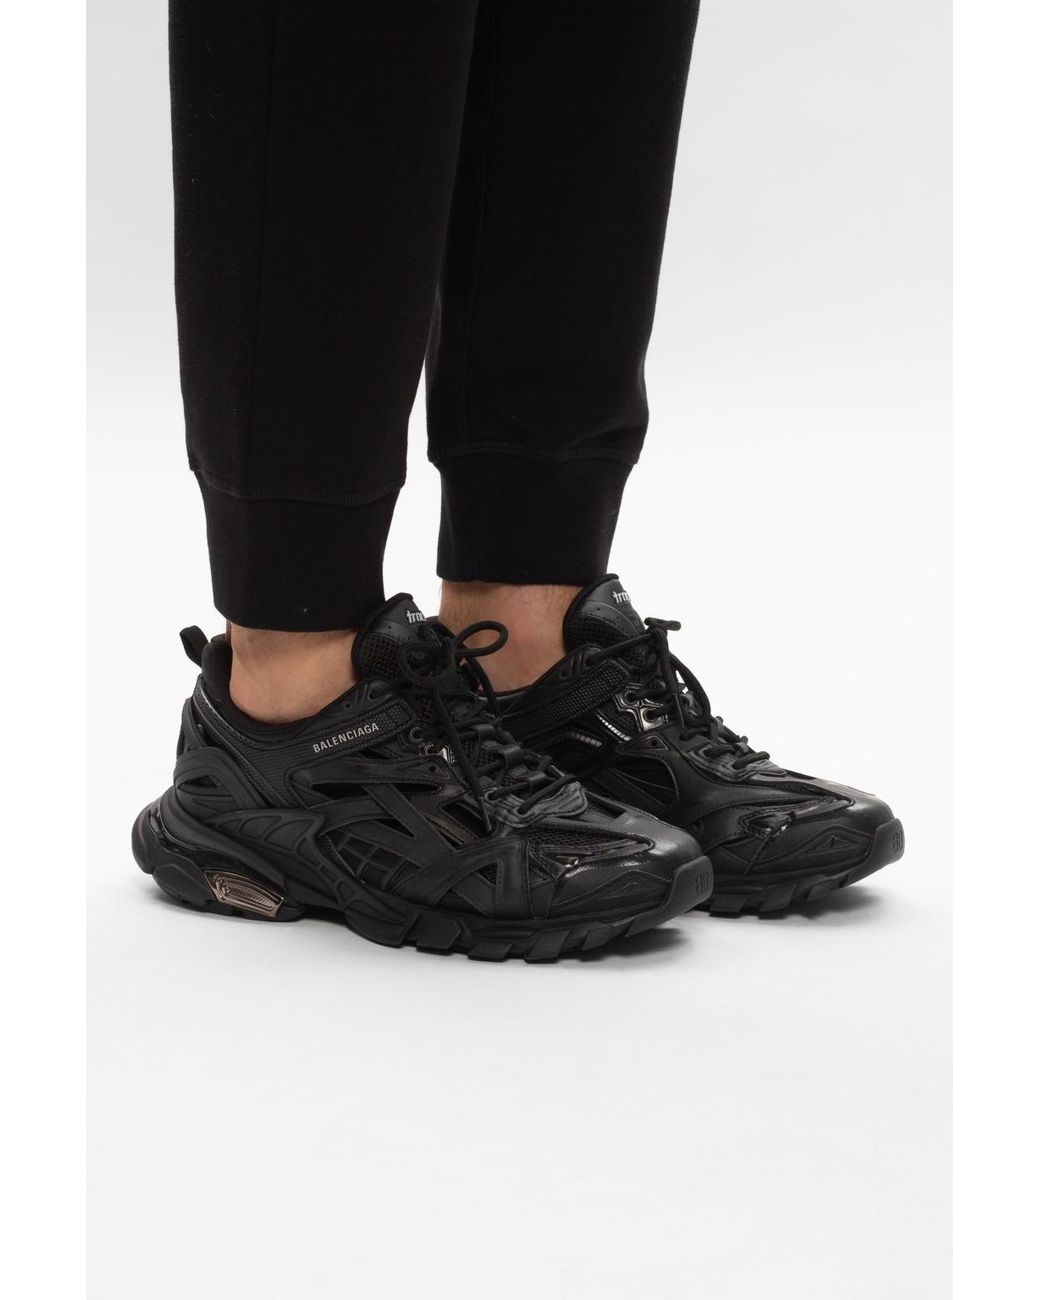 Balenciaga Track.2 Open Sneakers in Black for Men - Save 14% - Lyst